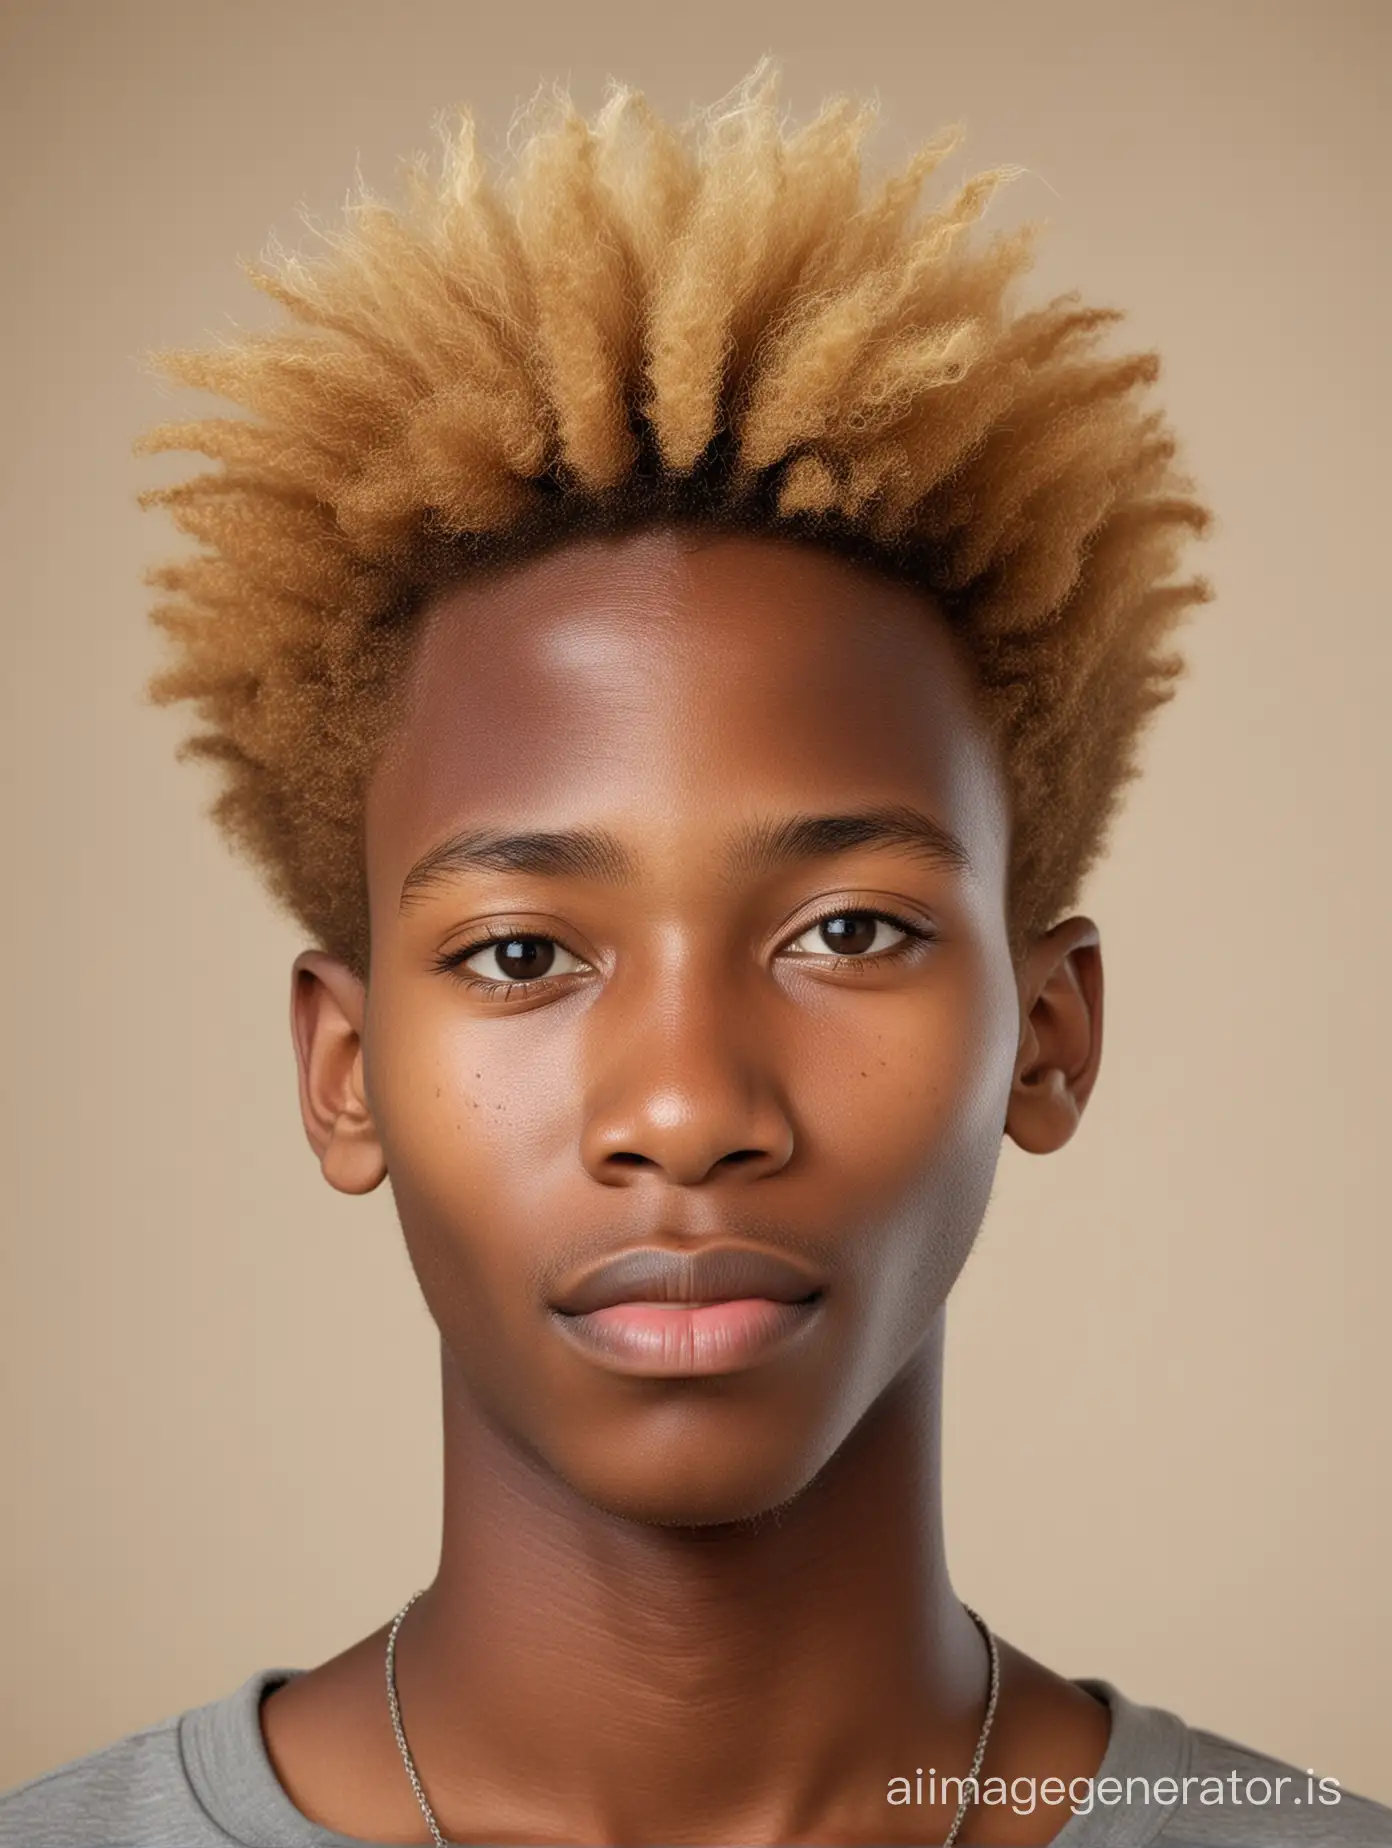 portrait of slightly smiling Ugandan 17-year-old boy with natural blonde afro hair, large flat nose and pointy ears, plain light background